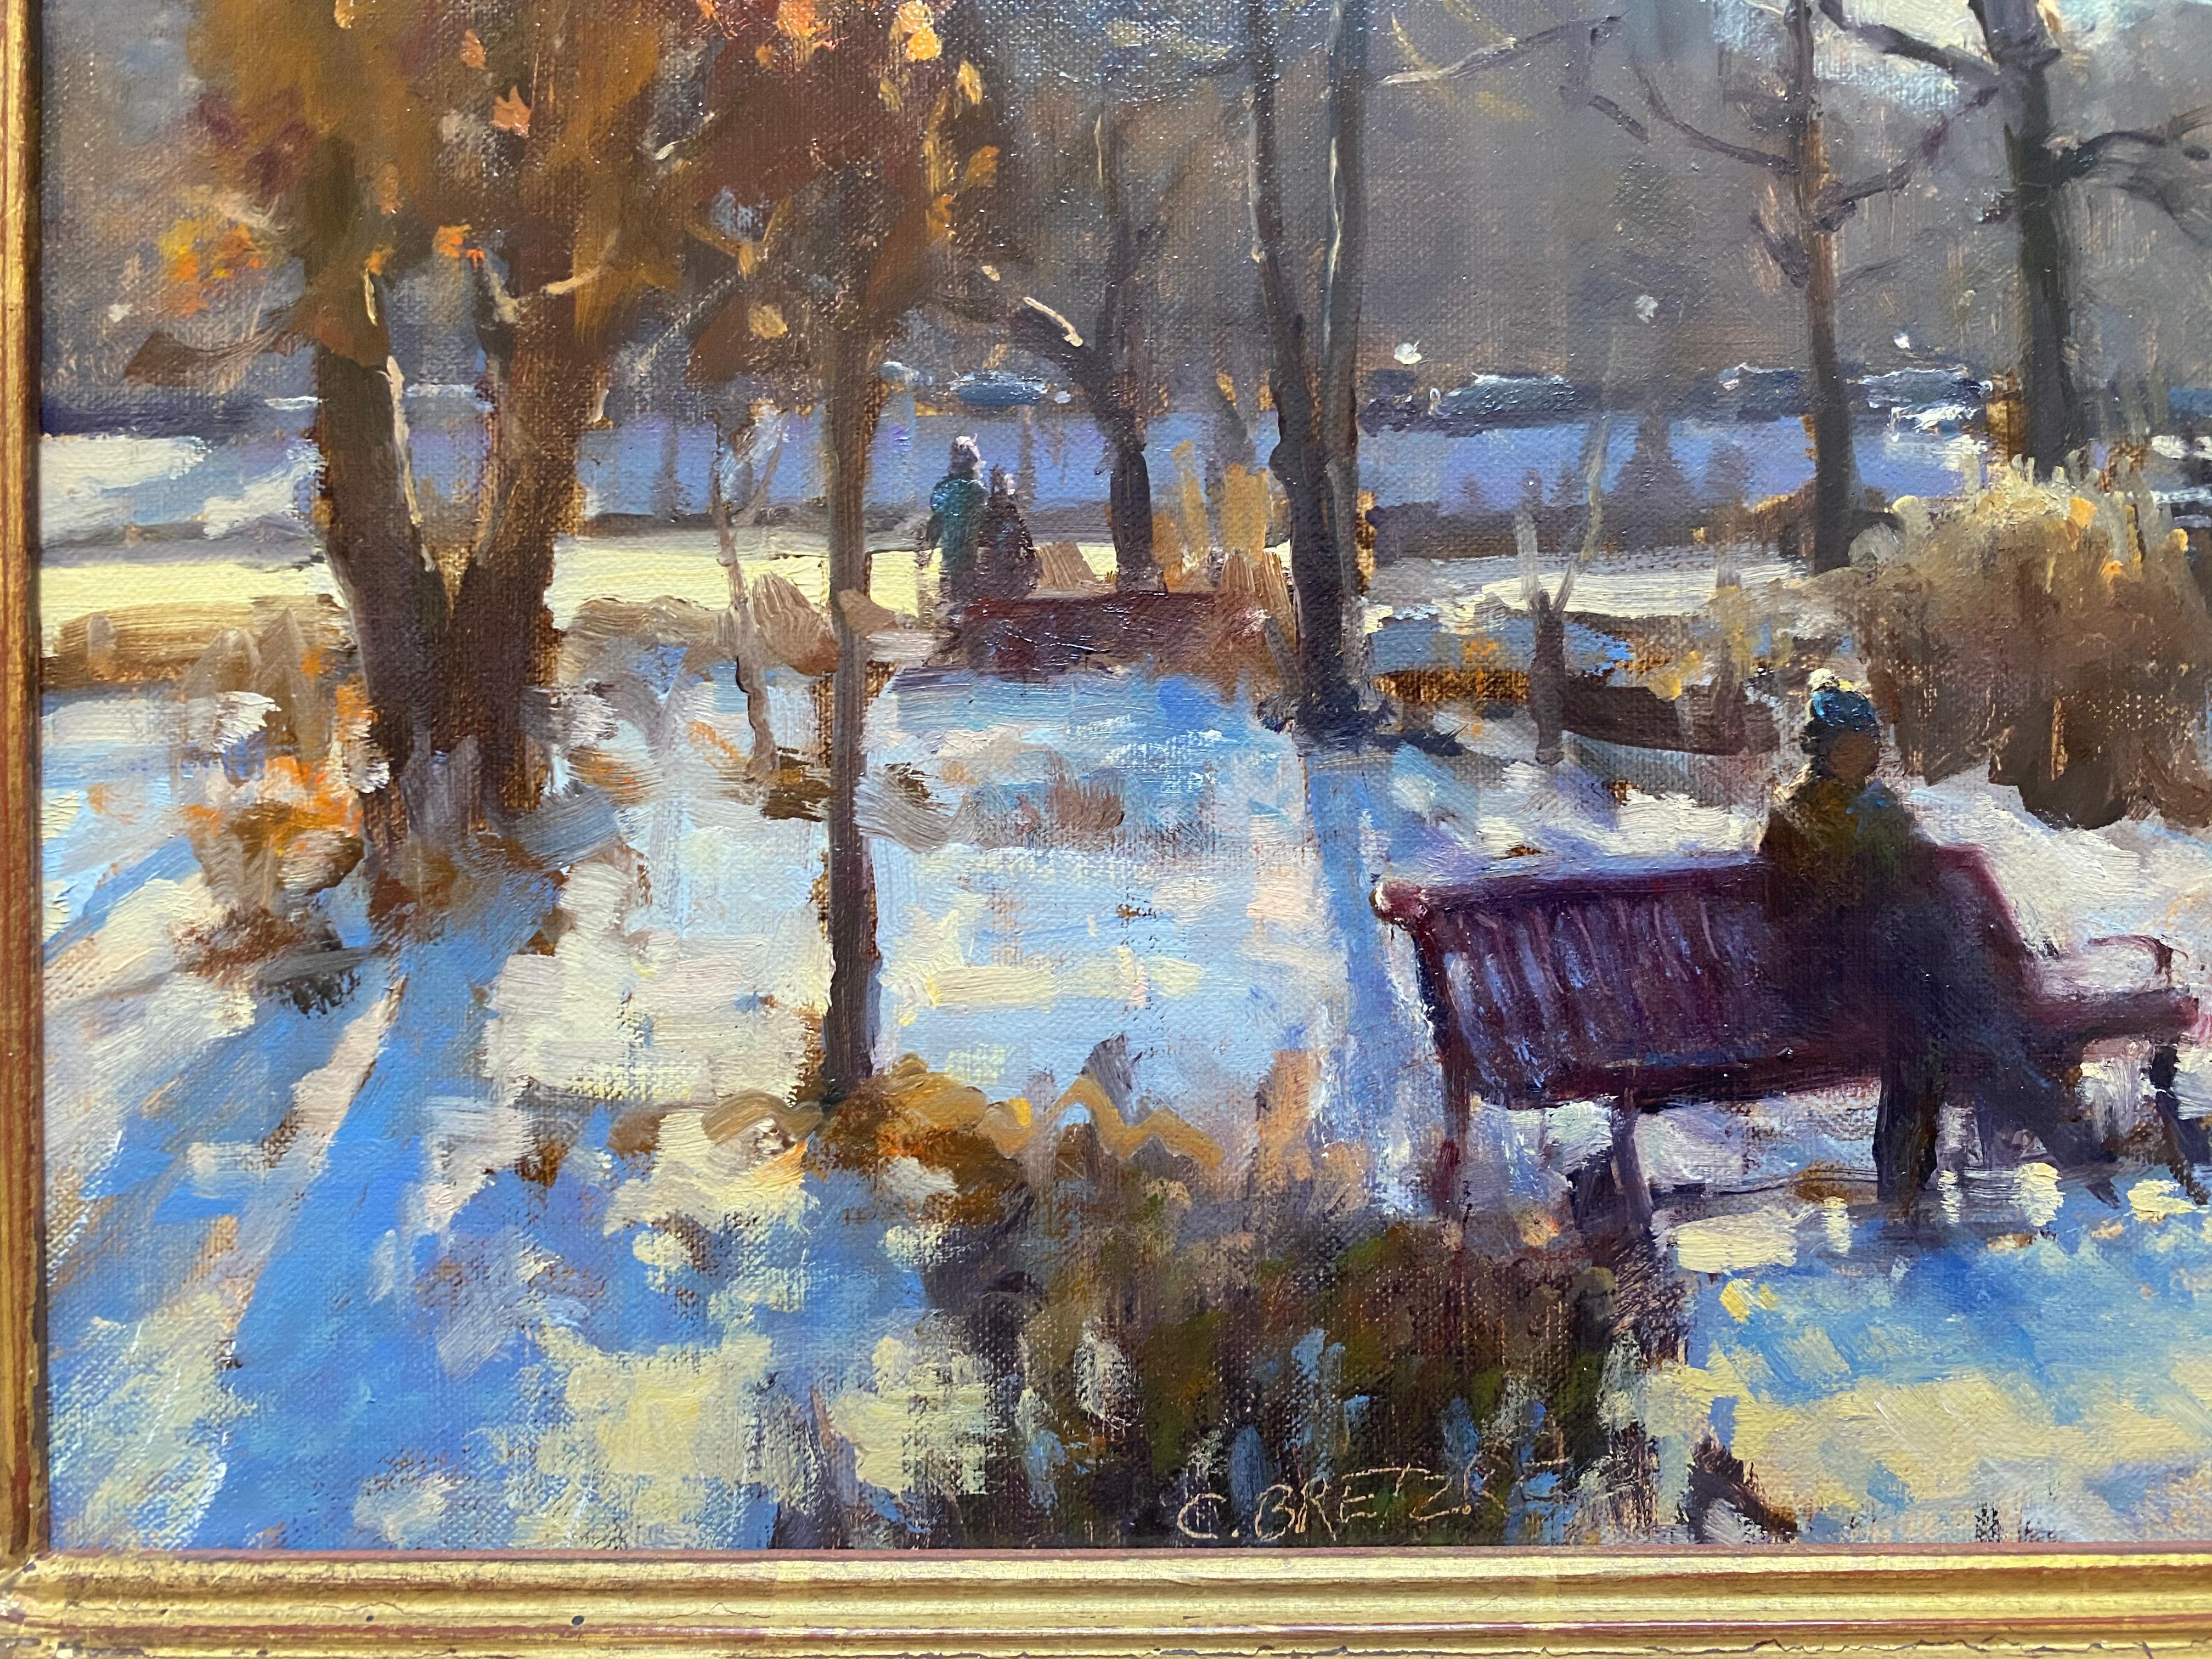 Oil painting of a suburban park in winter.  A figure sits on a bench, surrounded by snow-covered ground. A tall steeple reaches upward in the distant skyline. 

Painting dimensions: 12 x 16 inches
Framed dimensions: 17 x 21 inches

Artist Bio
Carl